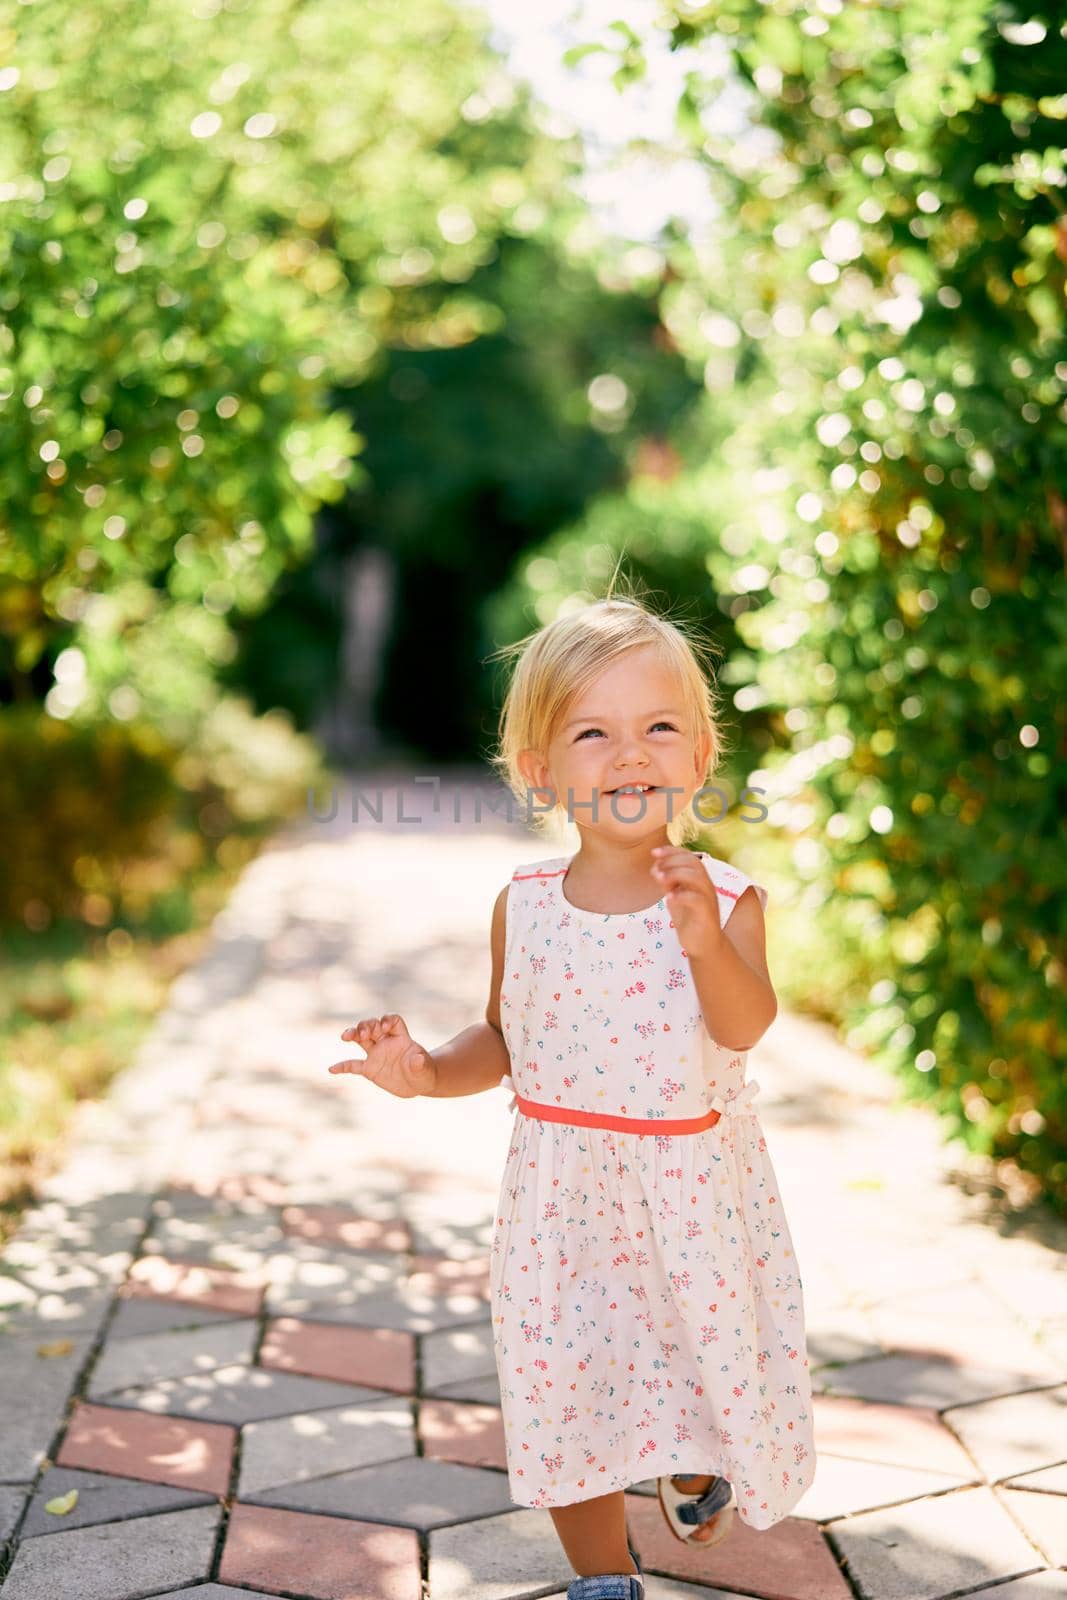 Little smiling girl runs along the paving stones in a green park. High quality photo